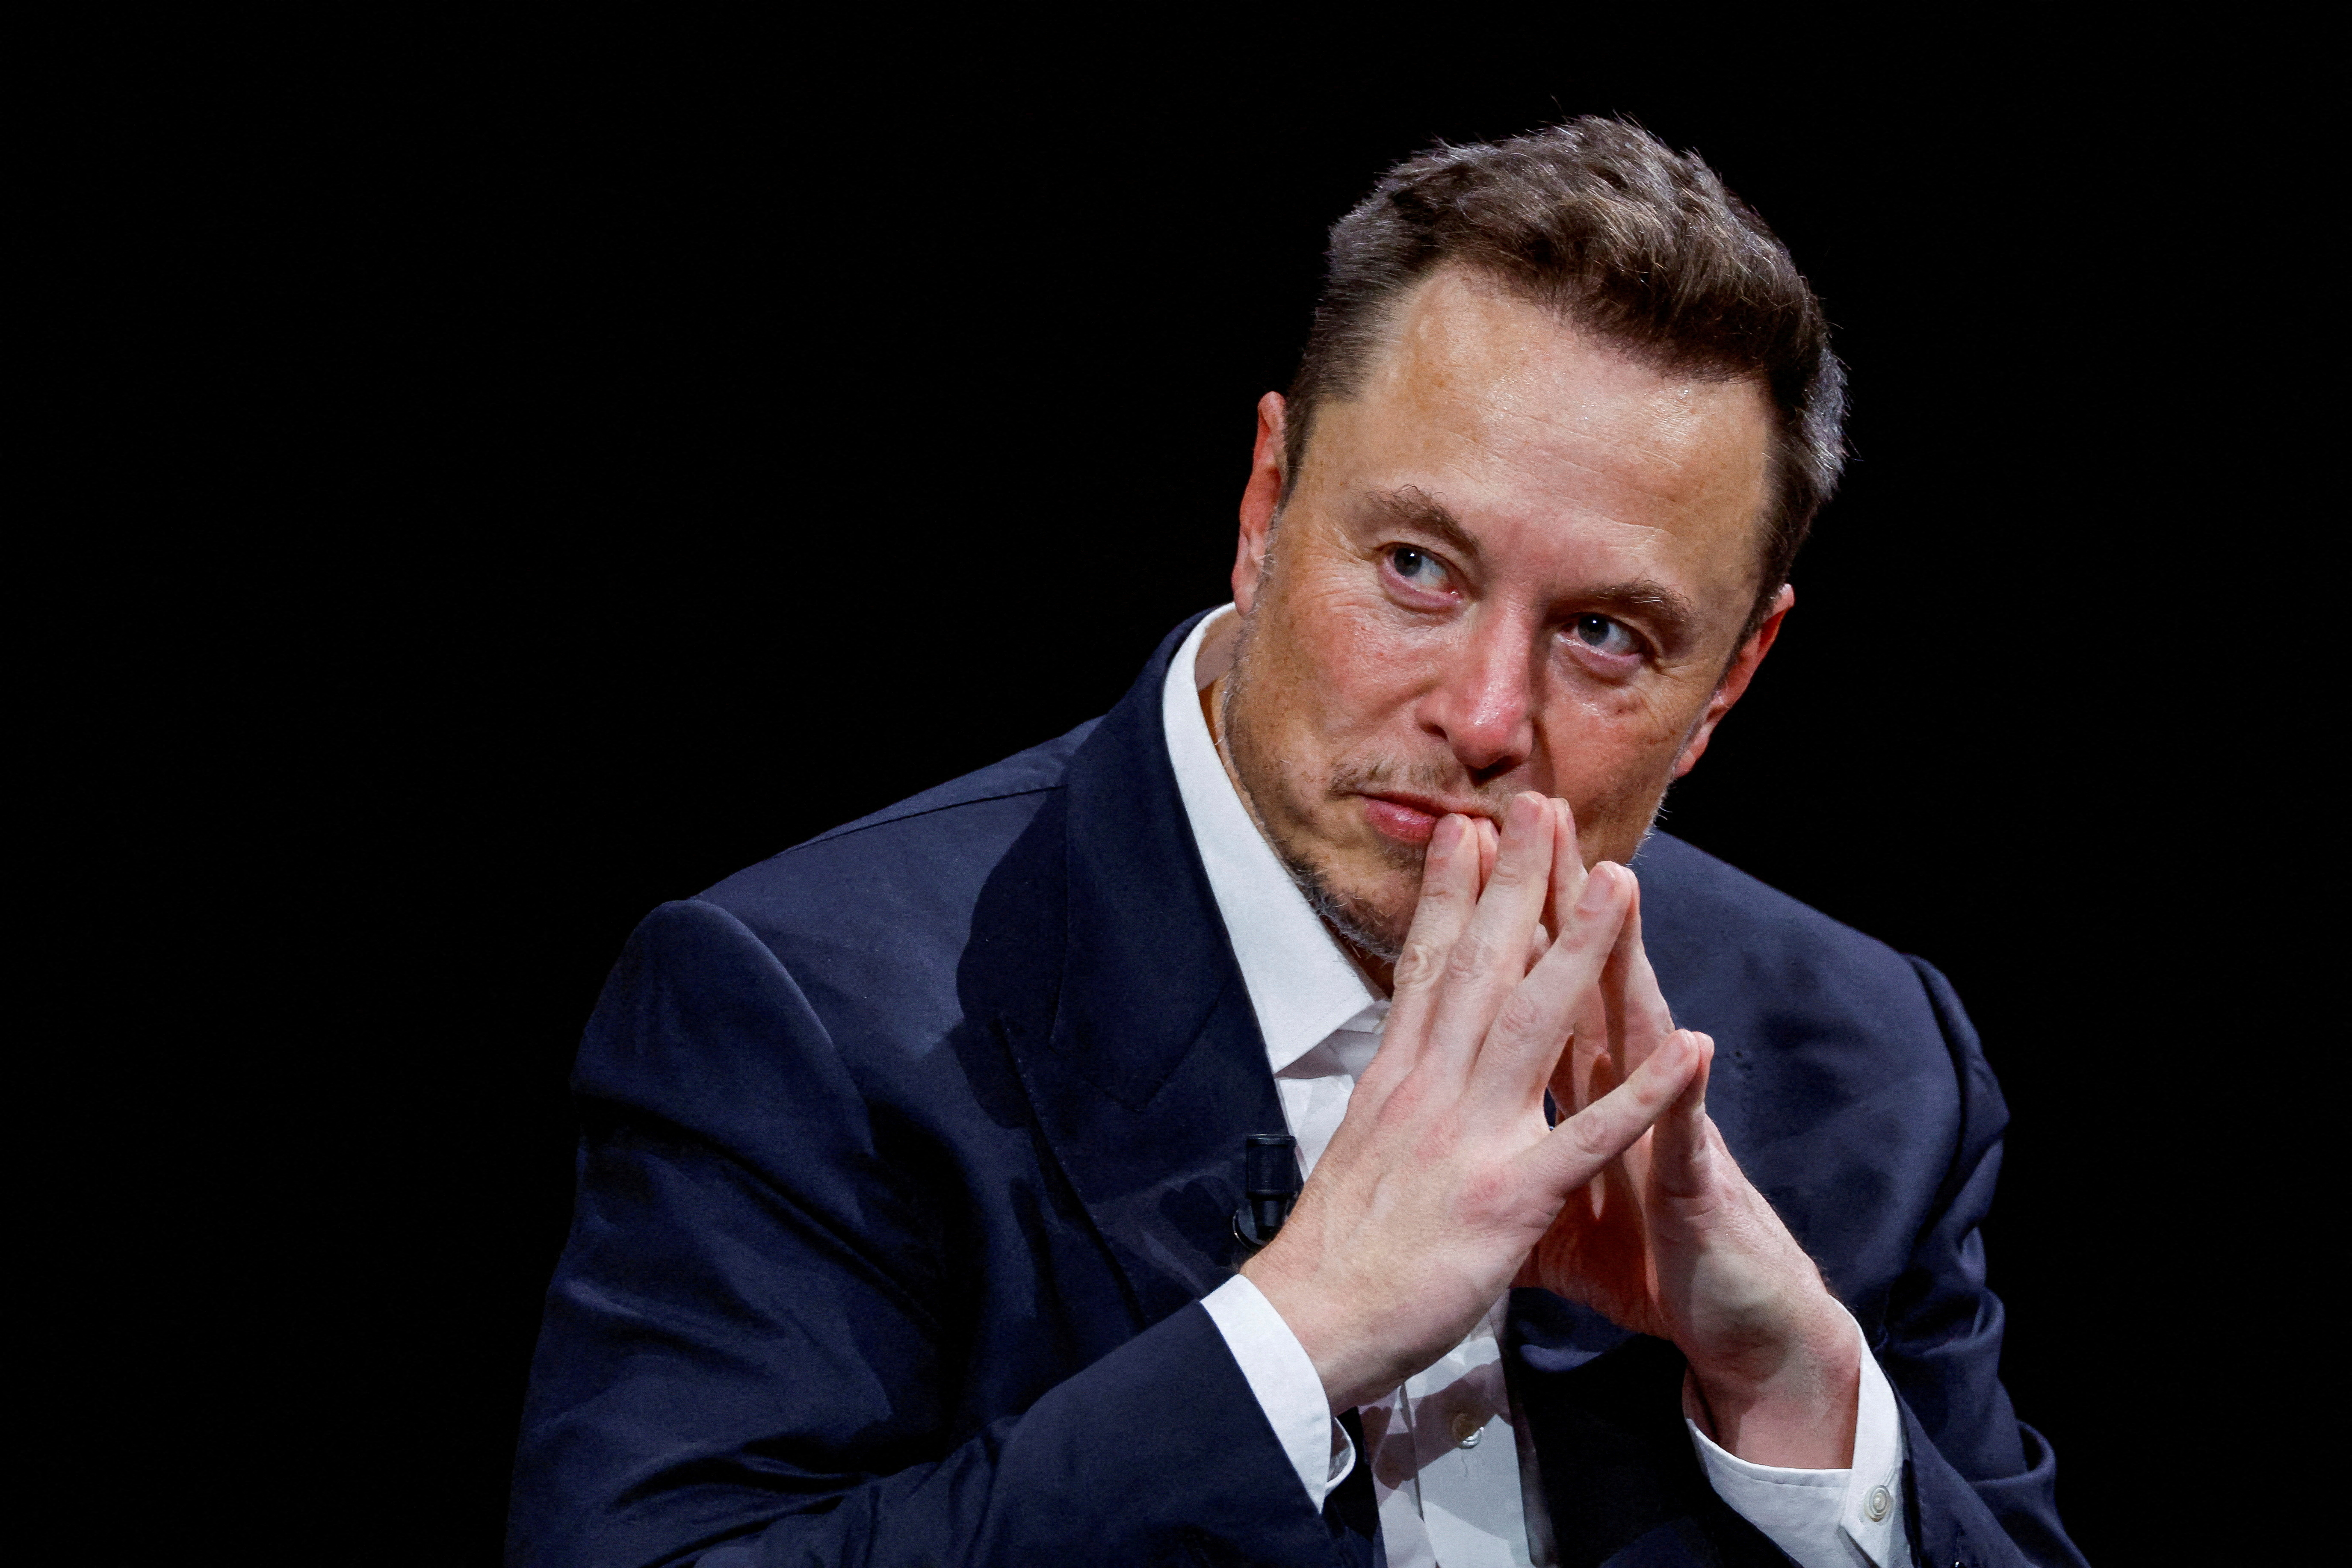 Tesla CEO and Twitter owner Elon Musk attends the VivaTech conference in Paris